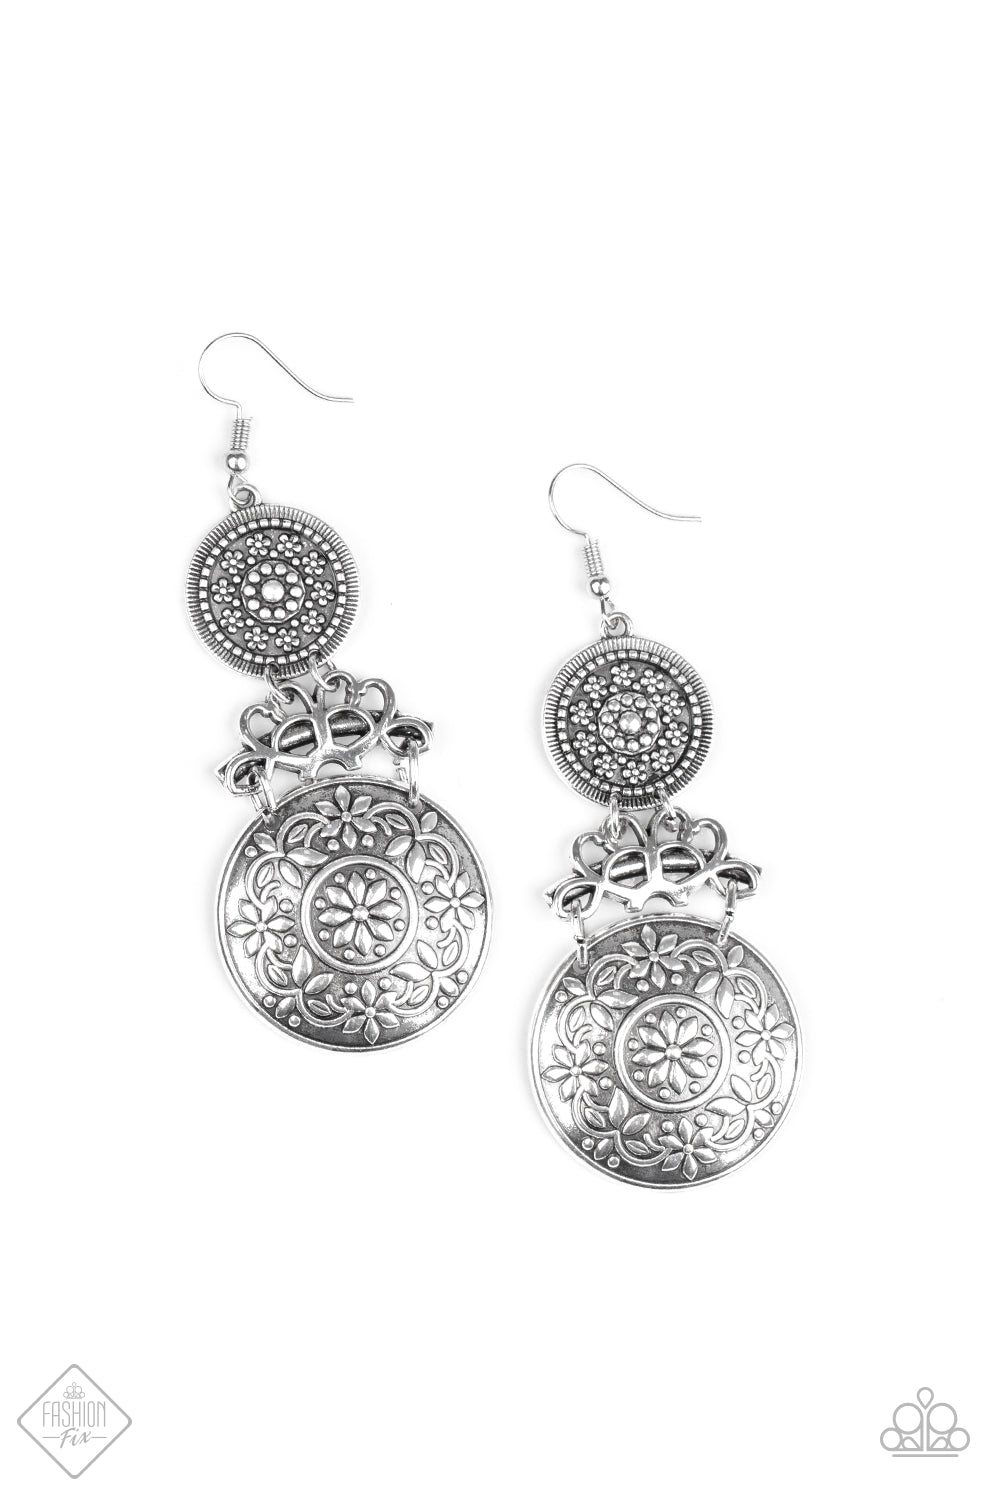 GARDEN ADVENTURE - SILVER FLORAL DISCS HINGED FASHION FIX EARRINGS